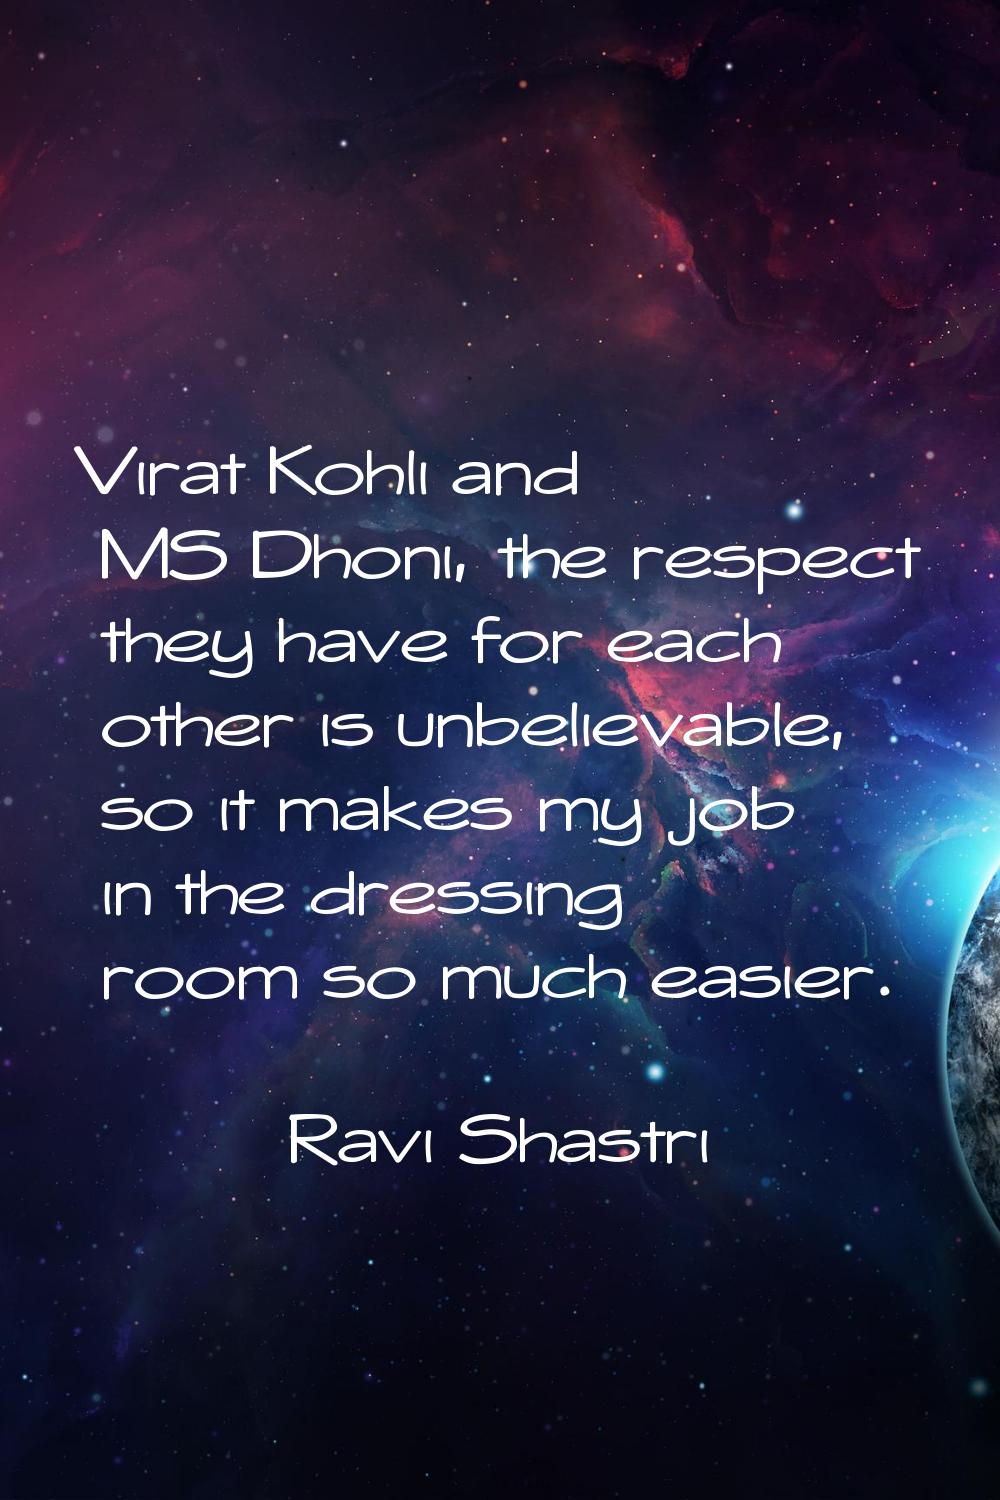 Virat Kohli and MS Dhoni, the respect they have for each other is unbelievable, so it makes my job 